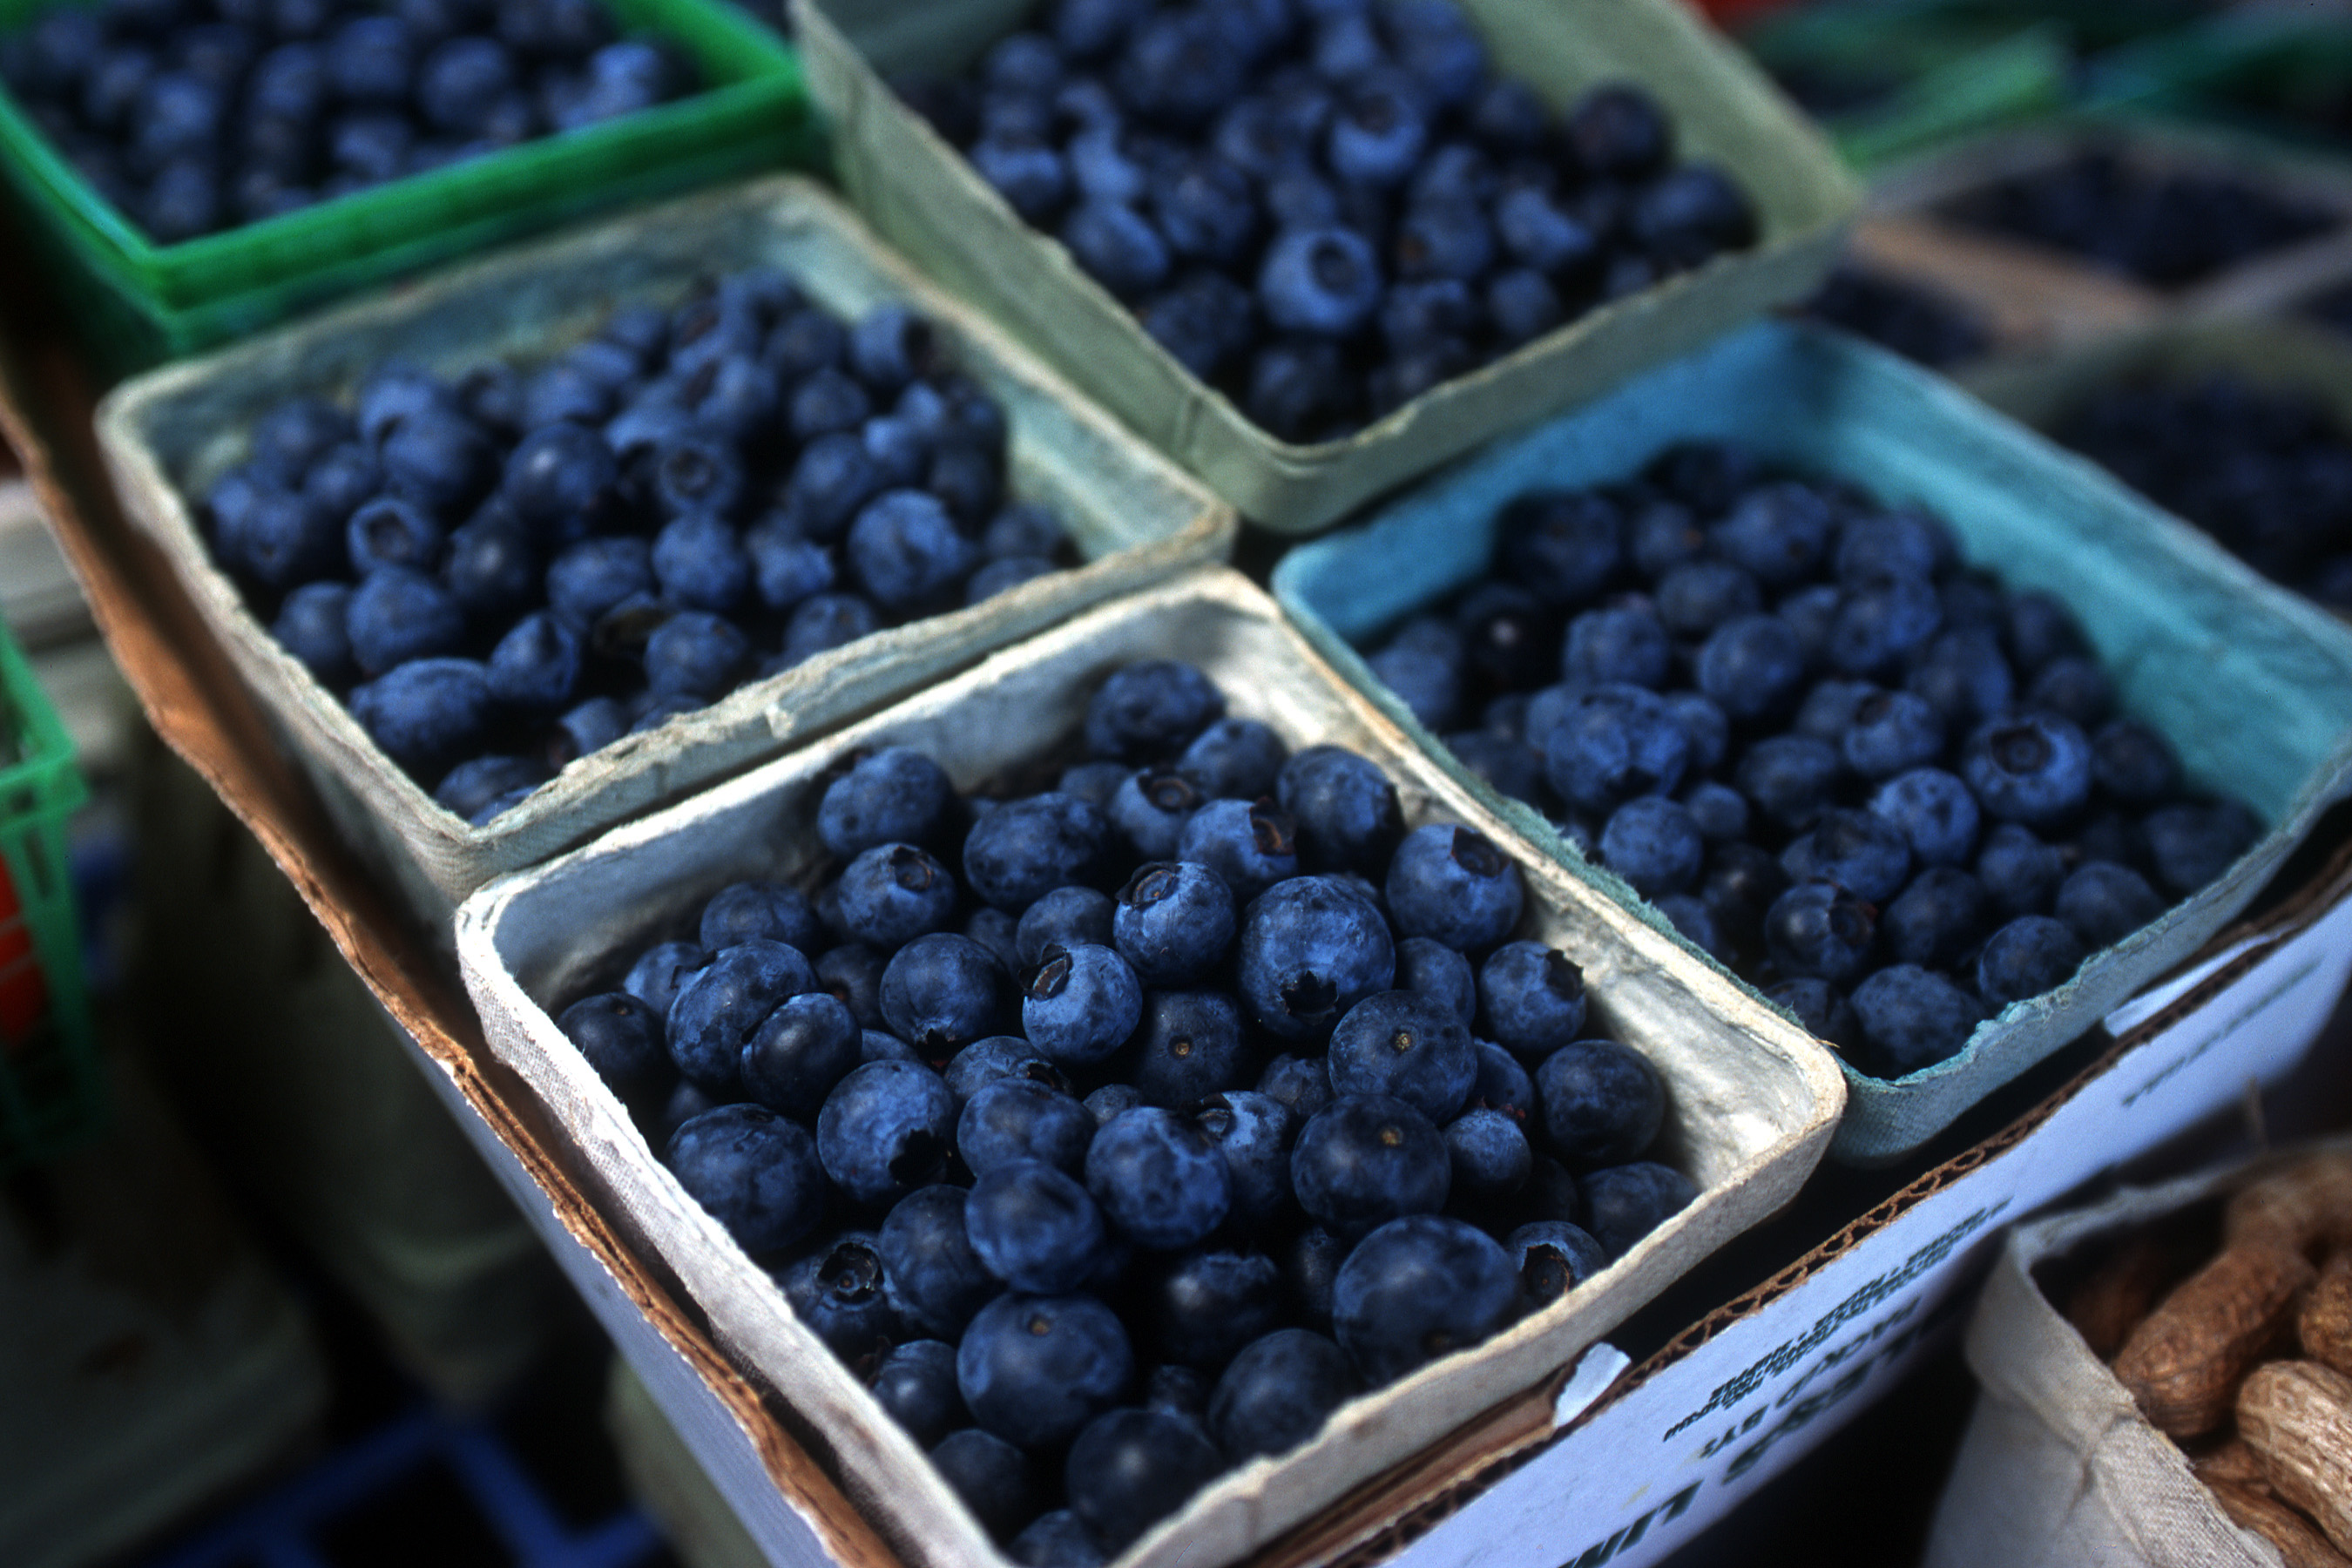 Fresh blueberries in produce containers.